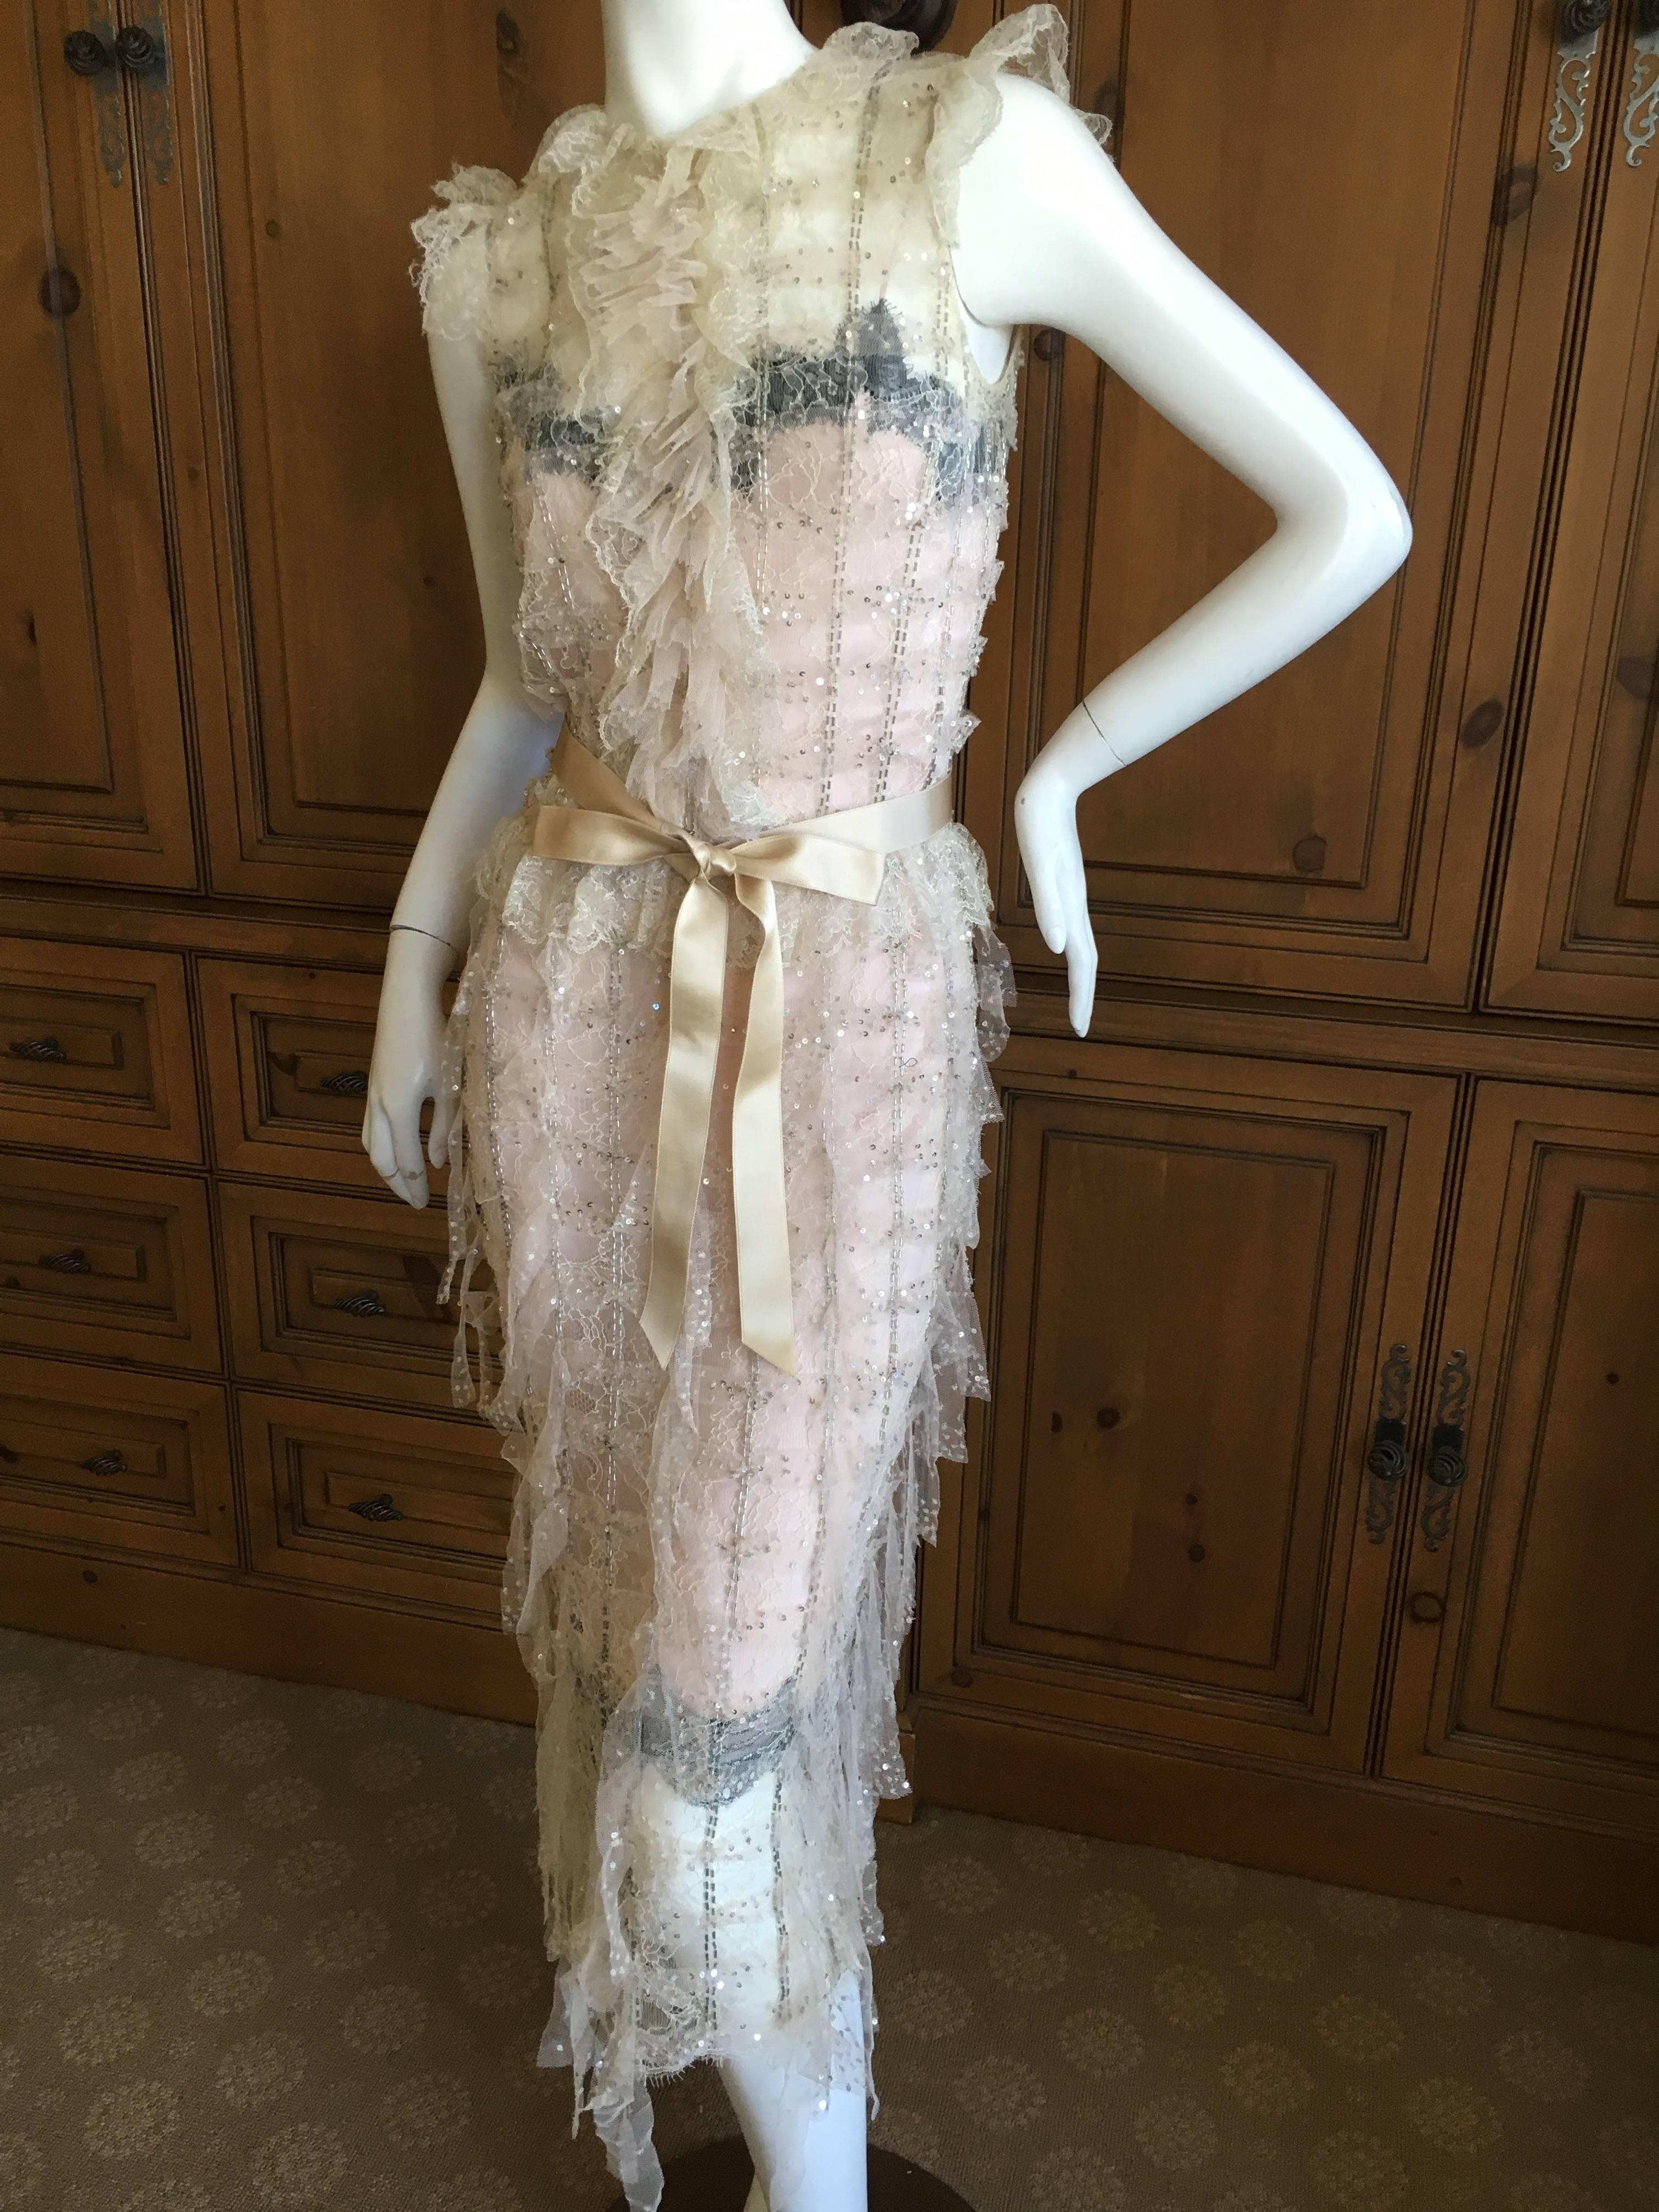  Oscar de la Renta Sheer Embellished Vintage Tiered Ruffle Evening Dress 
With slip and Ribbon belt
This is so beautiful, but hard to capture in photographs.
 The fabric is sheer with bugle beads throughout.
 size 0 
Bust 34"
 Waist 27"
